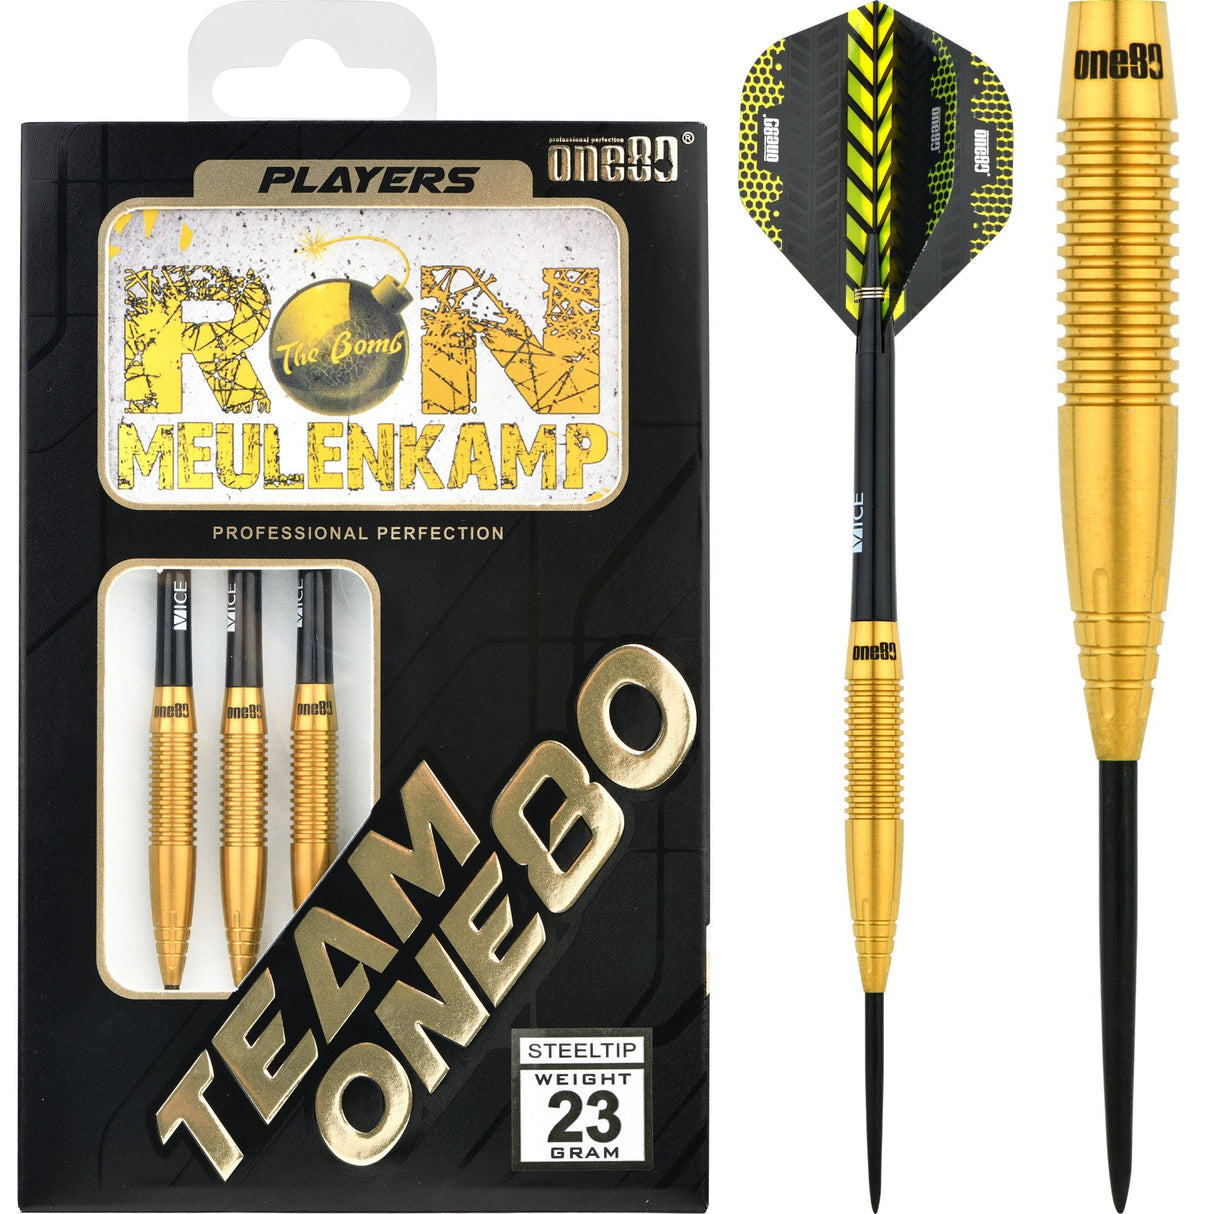 One80 Ron Meulenkamp Darts - Steel Tip - The Bomb - 23g PERS